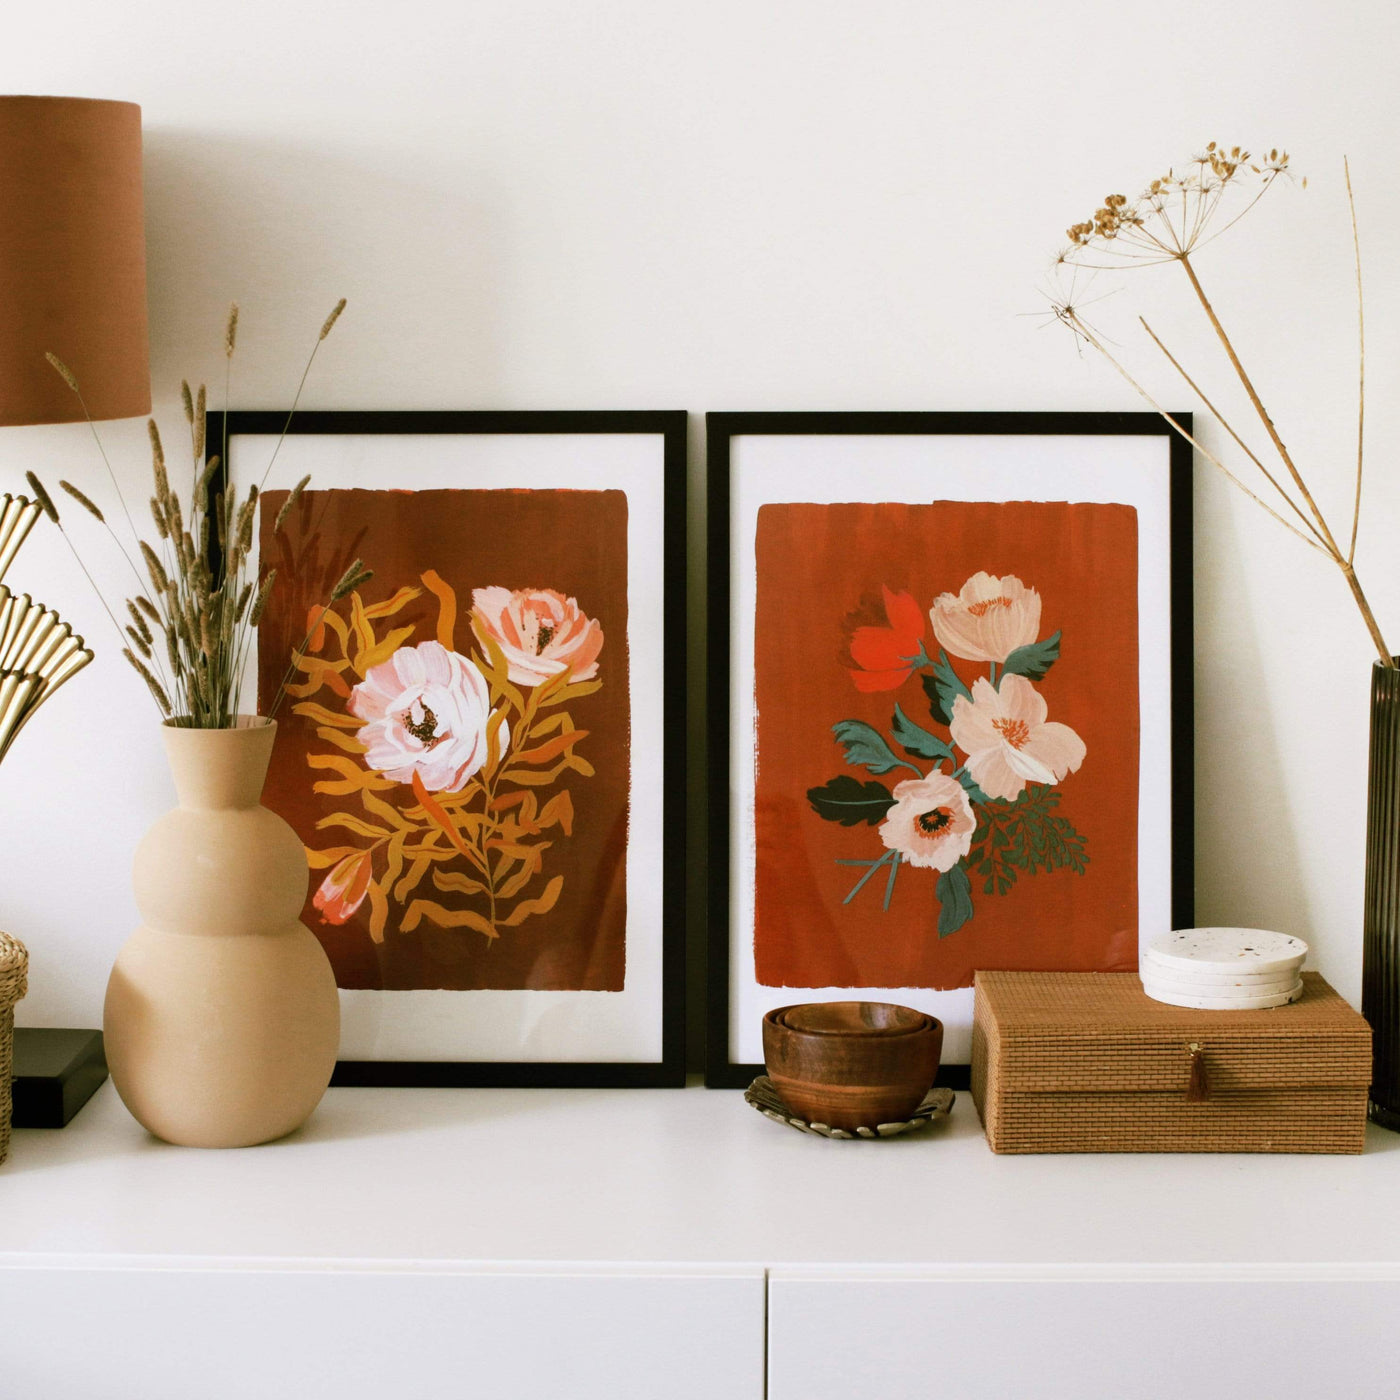 Red Floral Botanical Art Print With A Spray of Anemone Flowers On A Deep Red Background Next To Another Botanical Print - Annie Dornan Smith